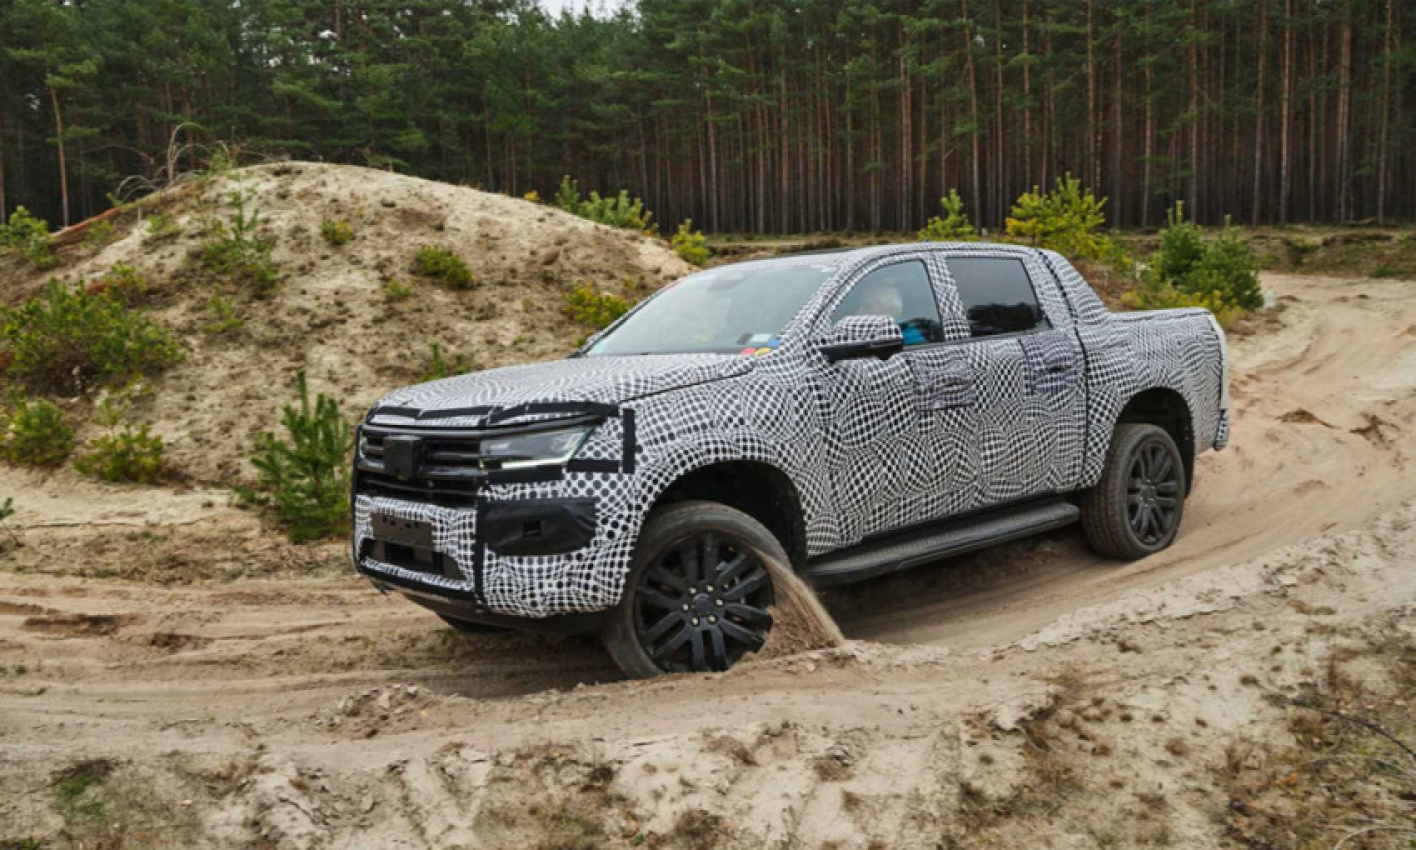 all news, autos, cars, amarok, ford, ford ranger, silverton, silverton assembly plant, volkswagen amarok, vw, vw amarok, here is what we know about the 2023 vw amarok so far 